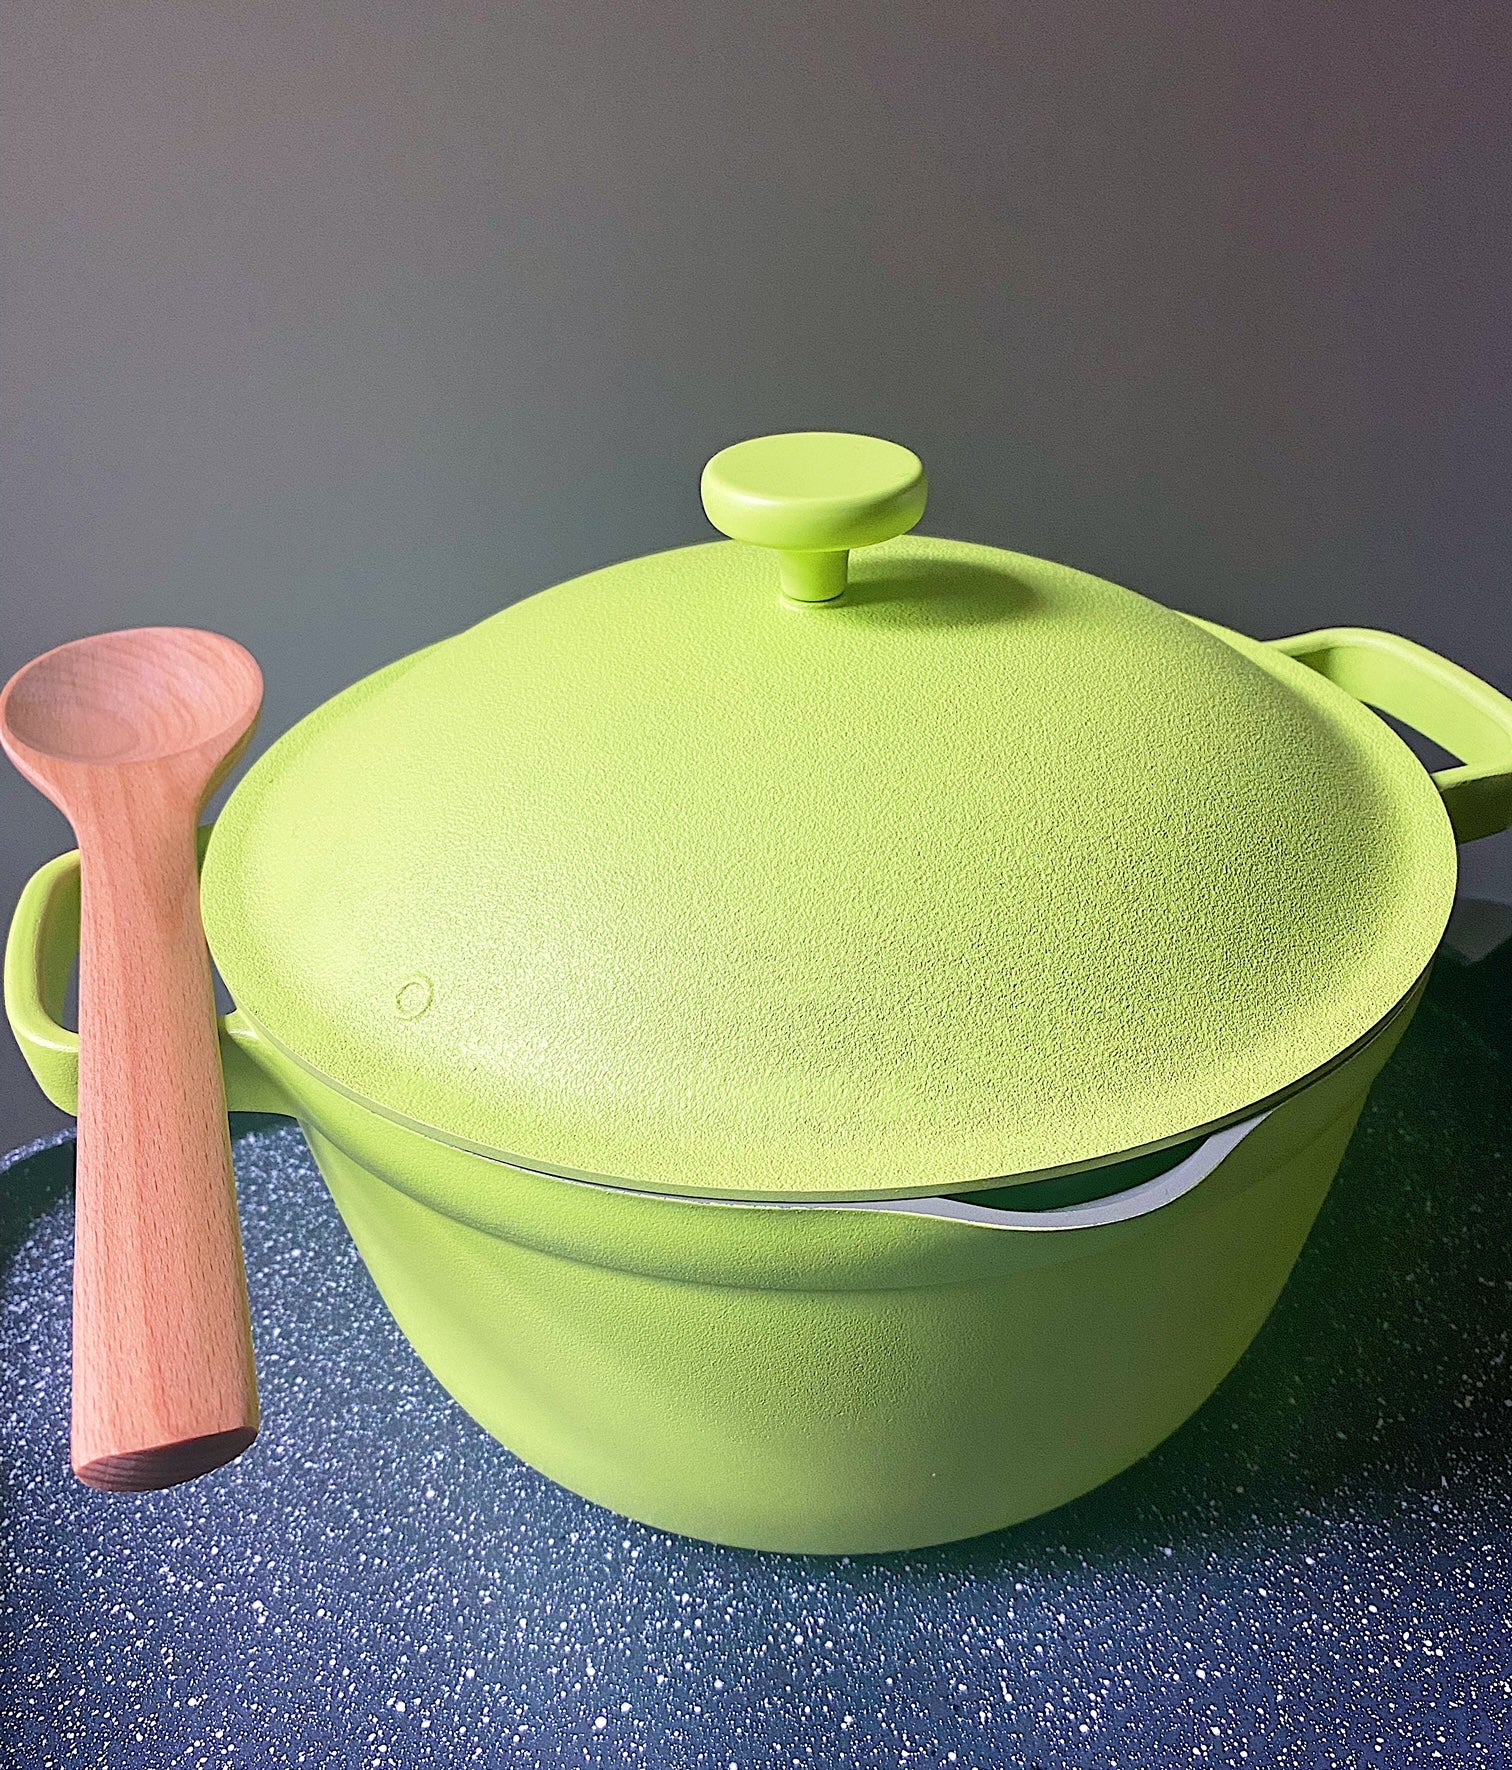 the bright green pot with a wooden spoon resting on its handle